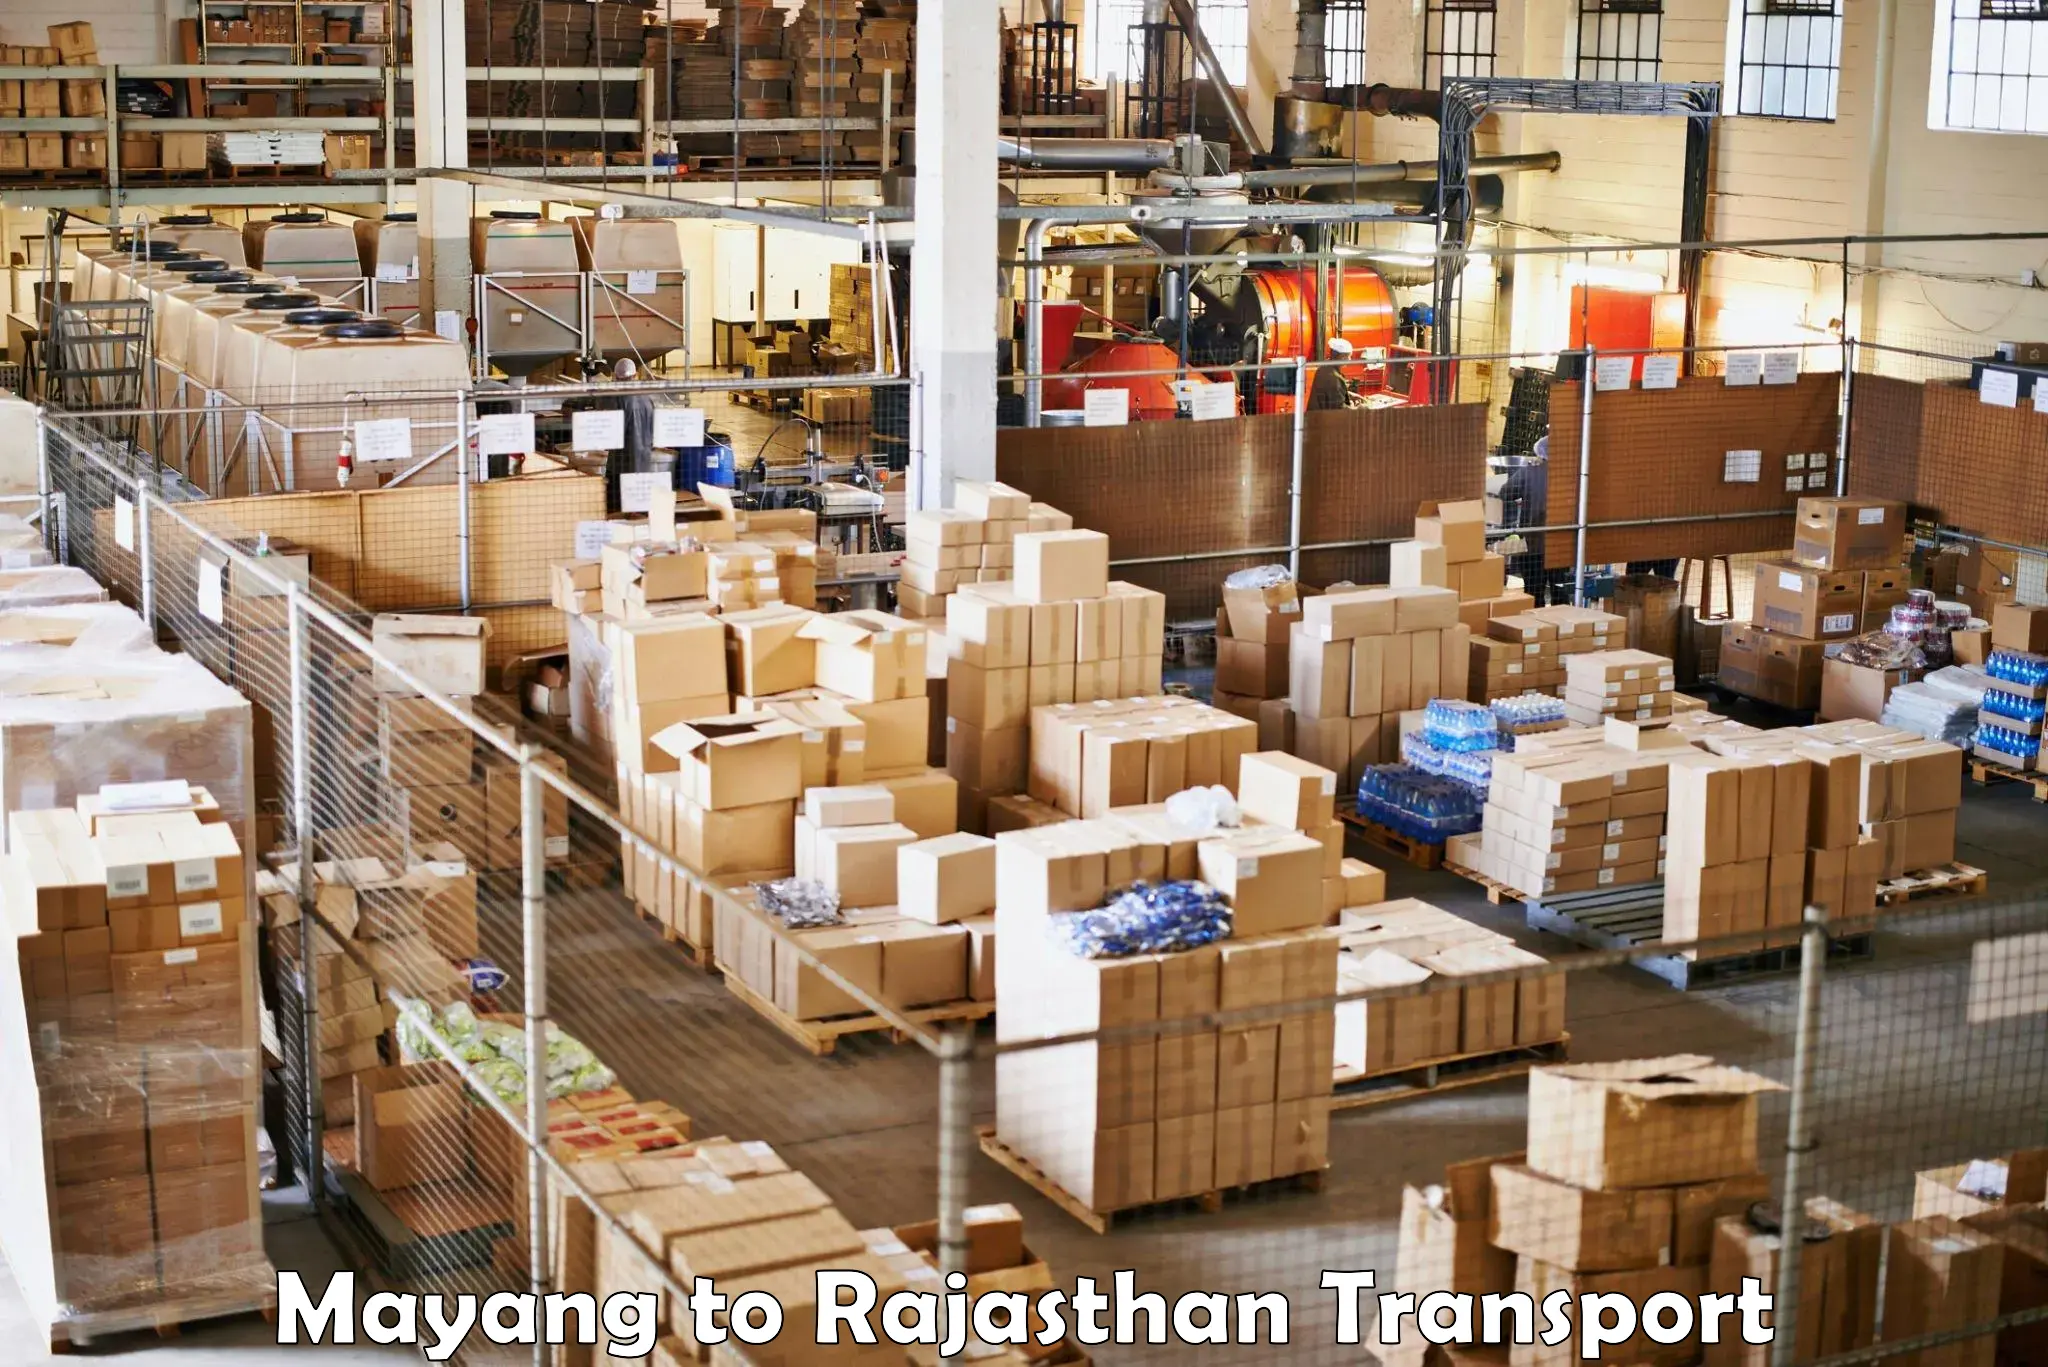 Parcel transport services Mayang to Asind